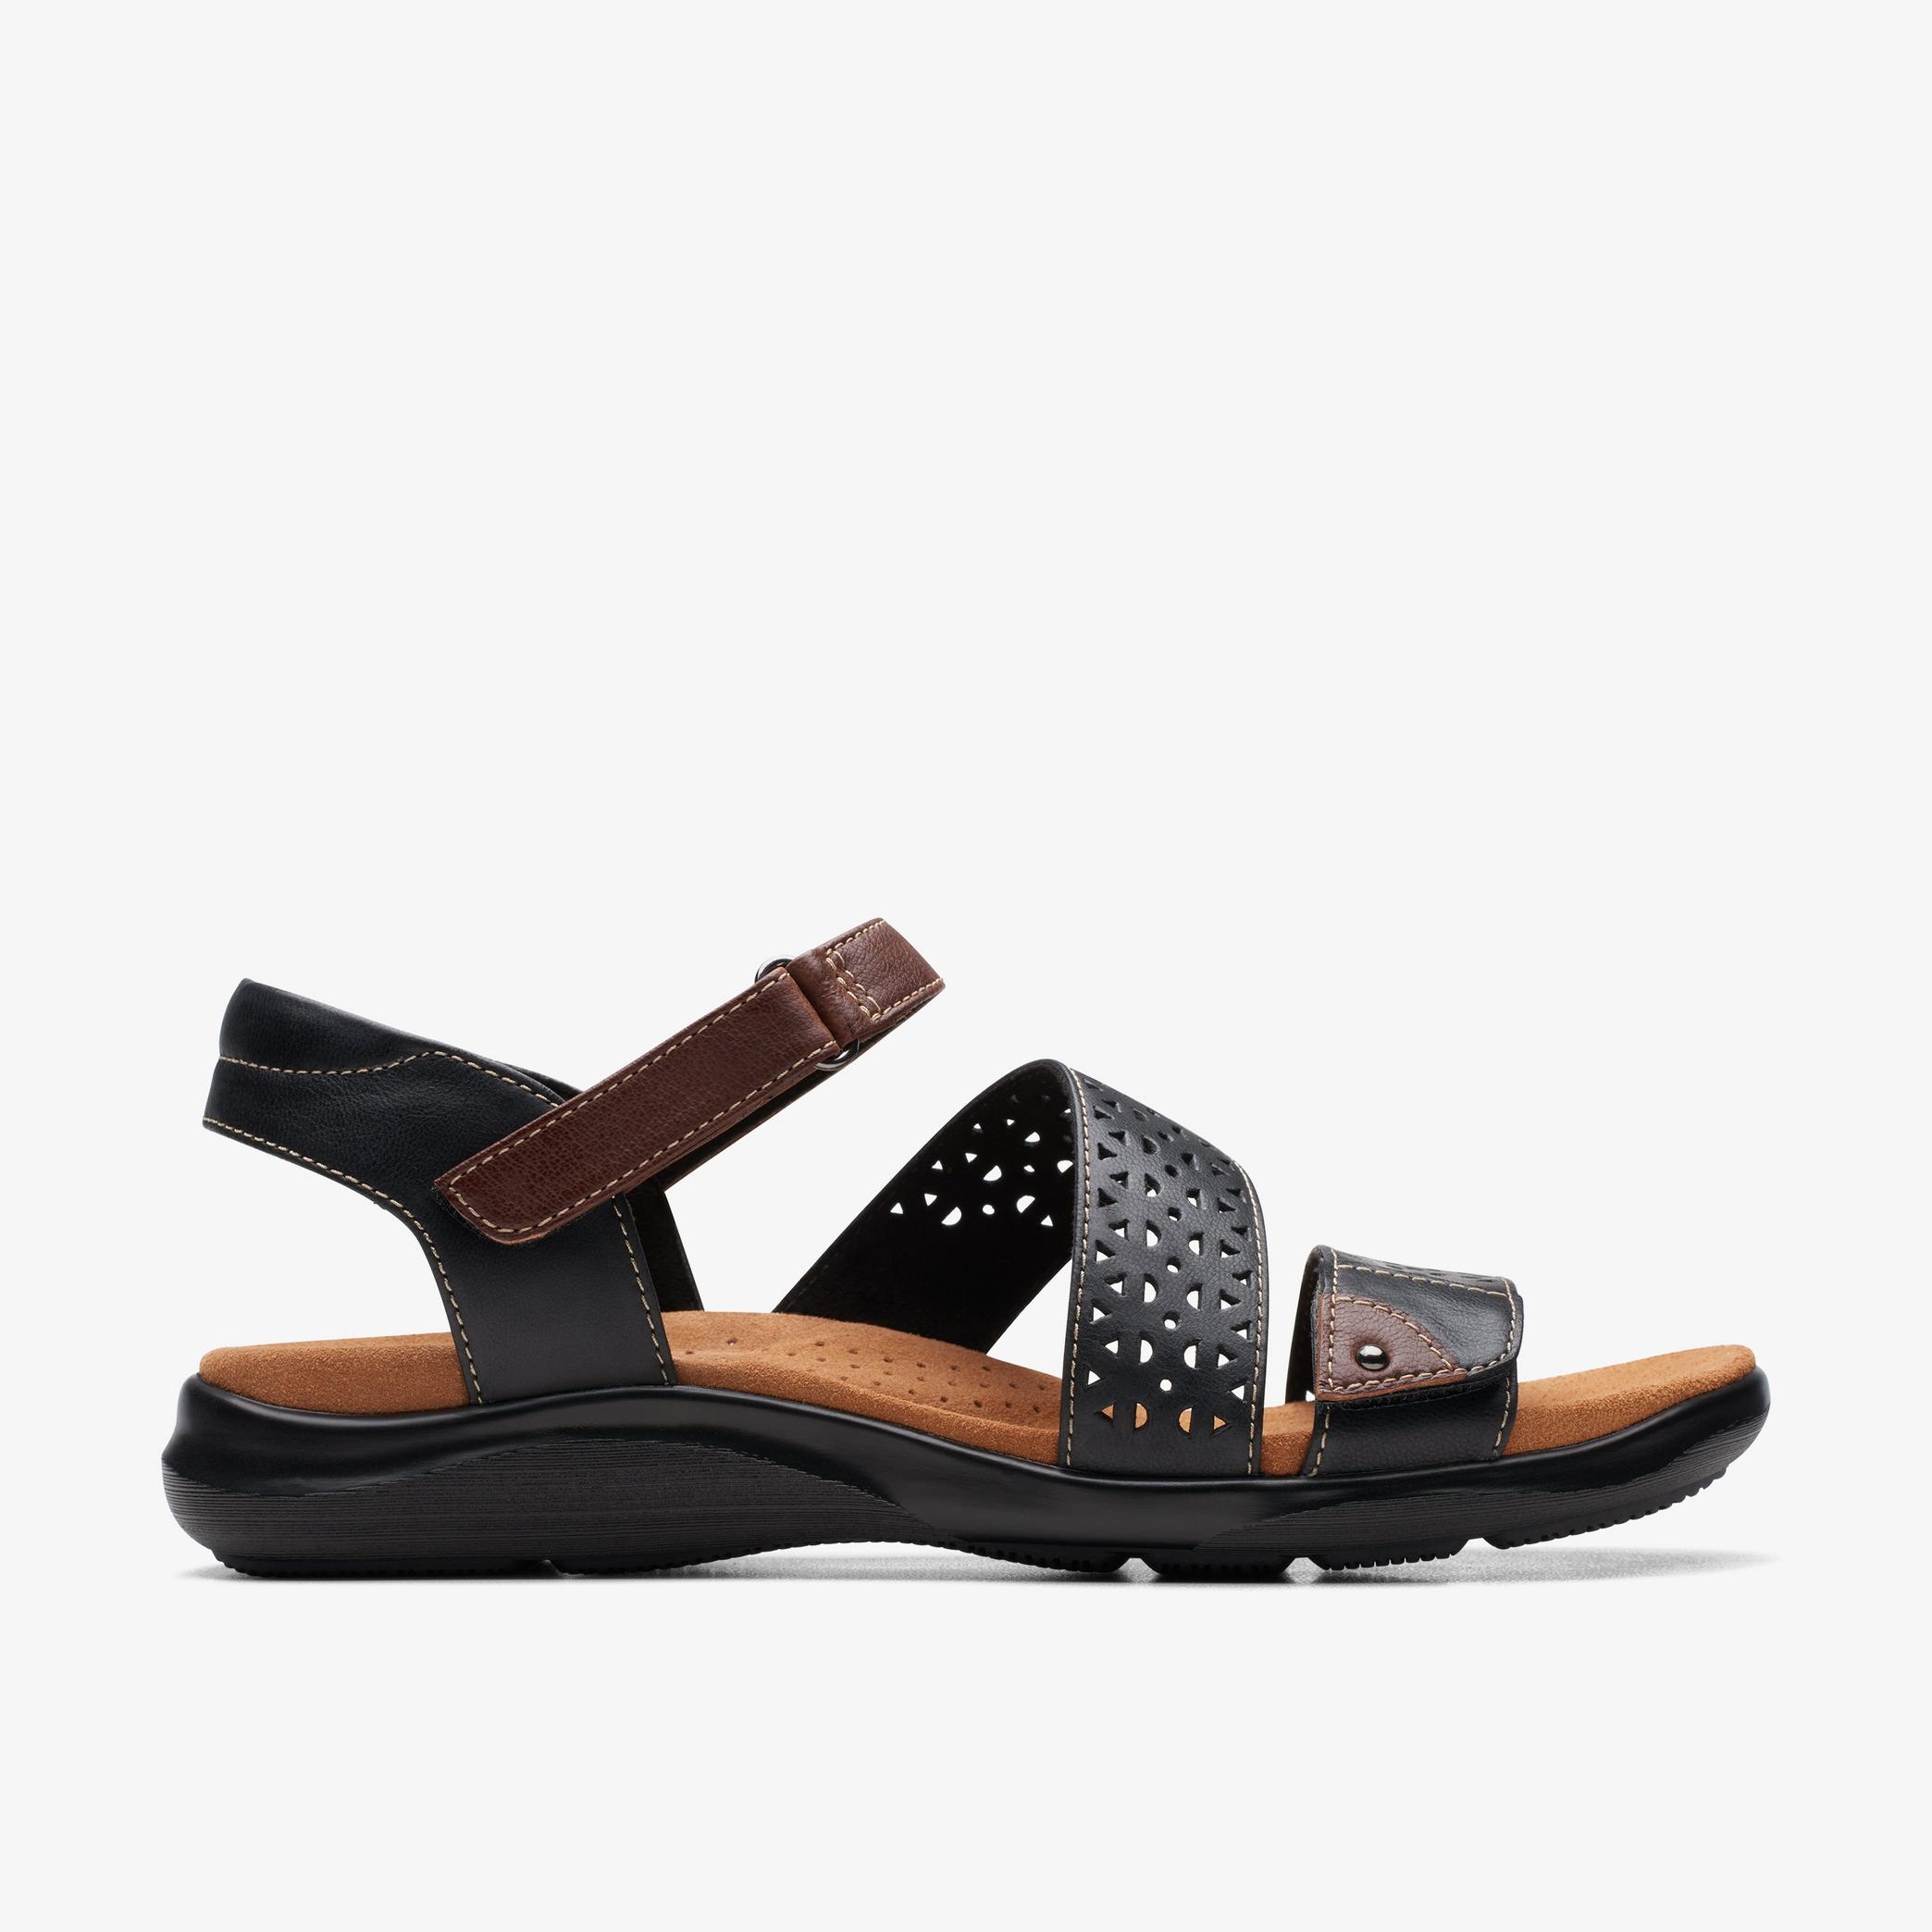 Kitly Way Black Leather Flat Sandals, view 1 of 6